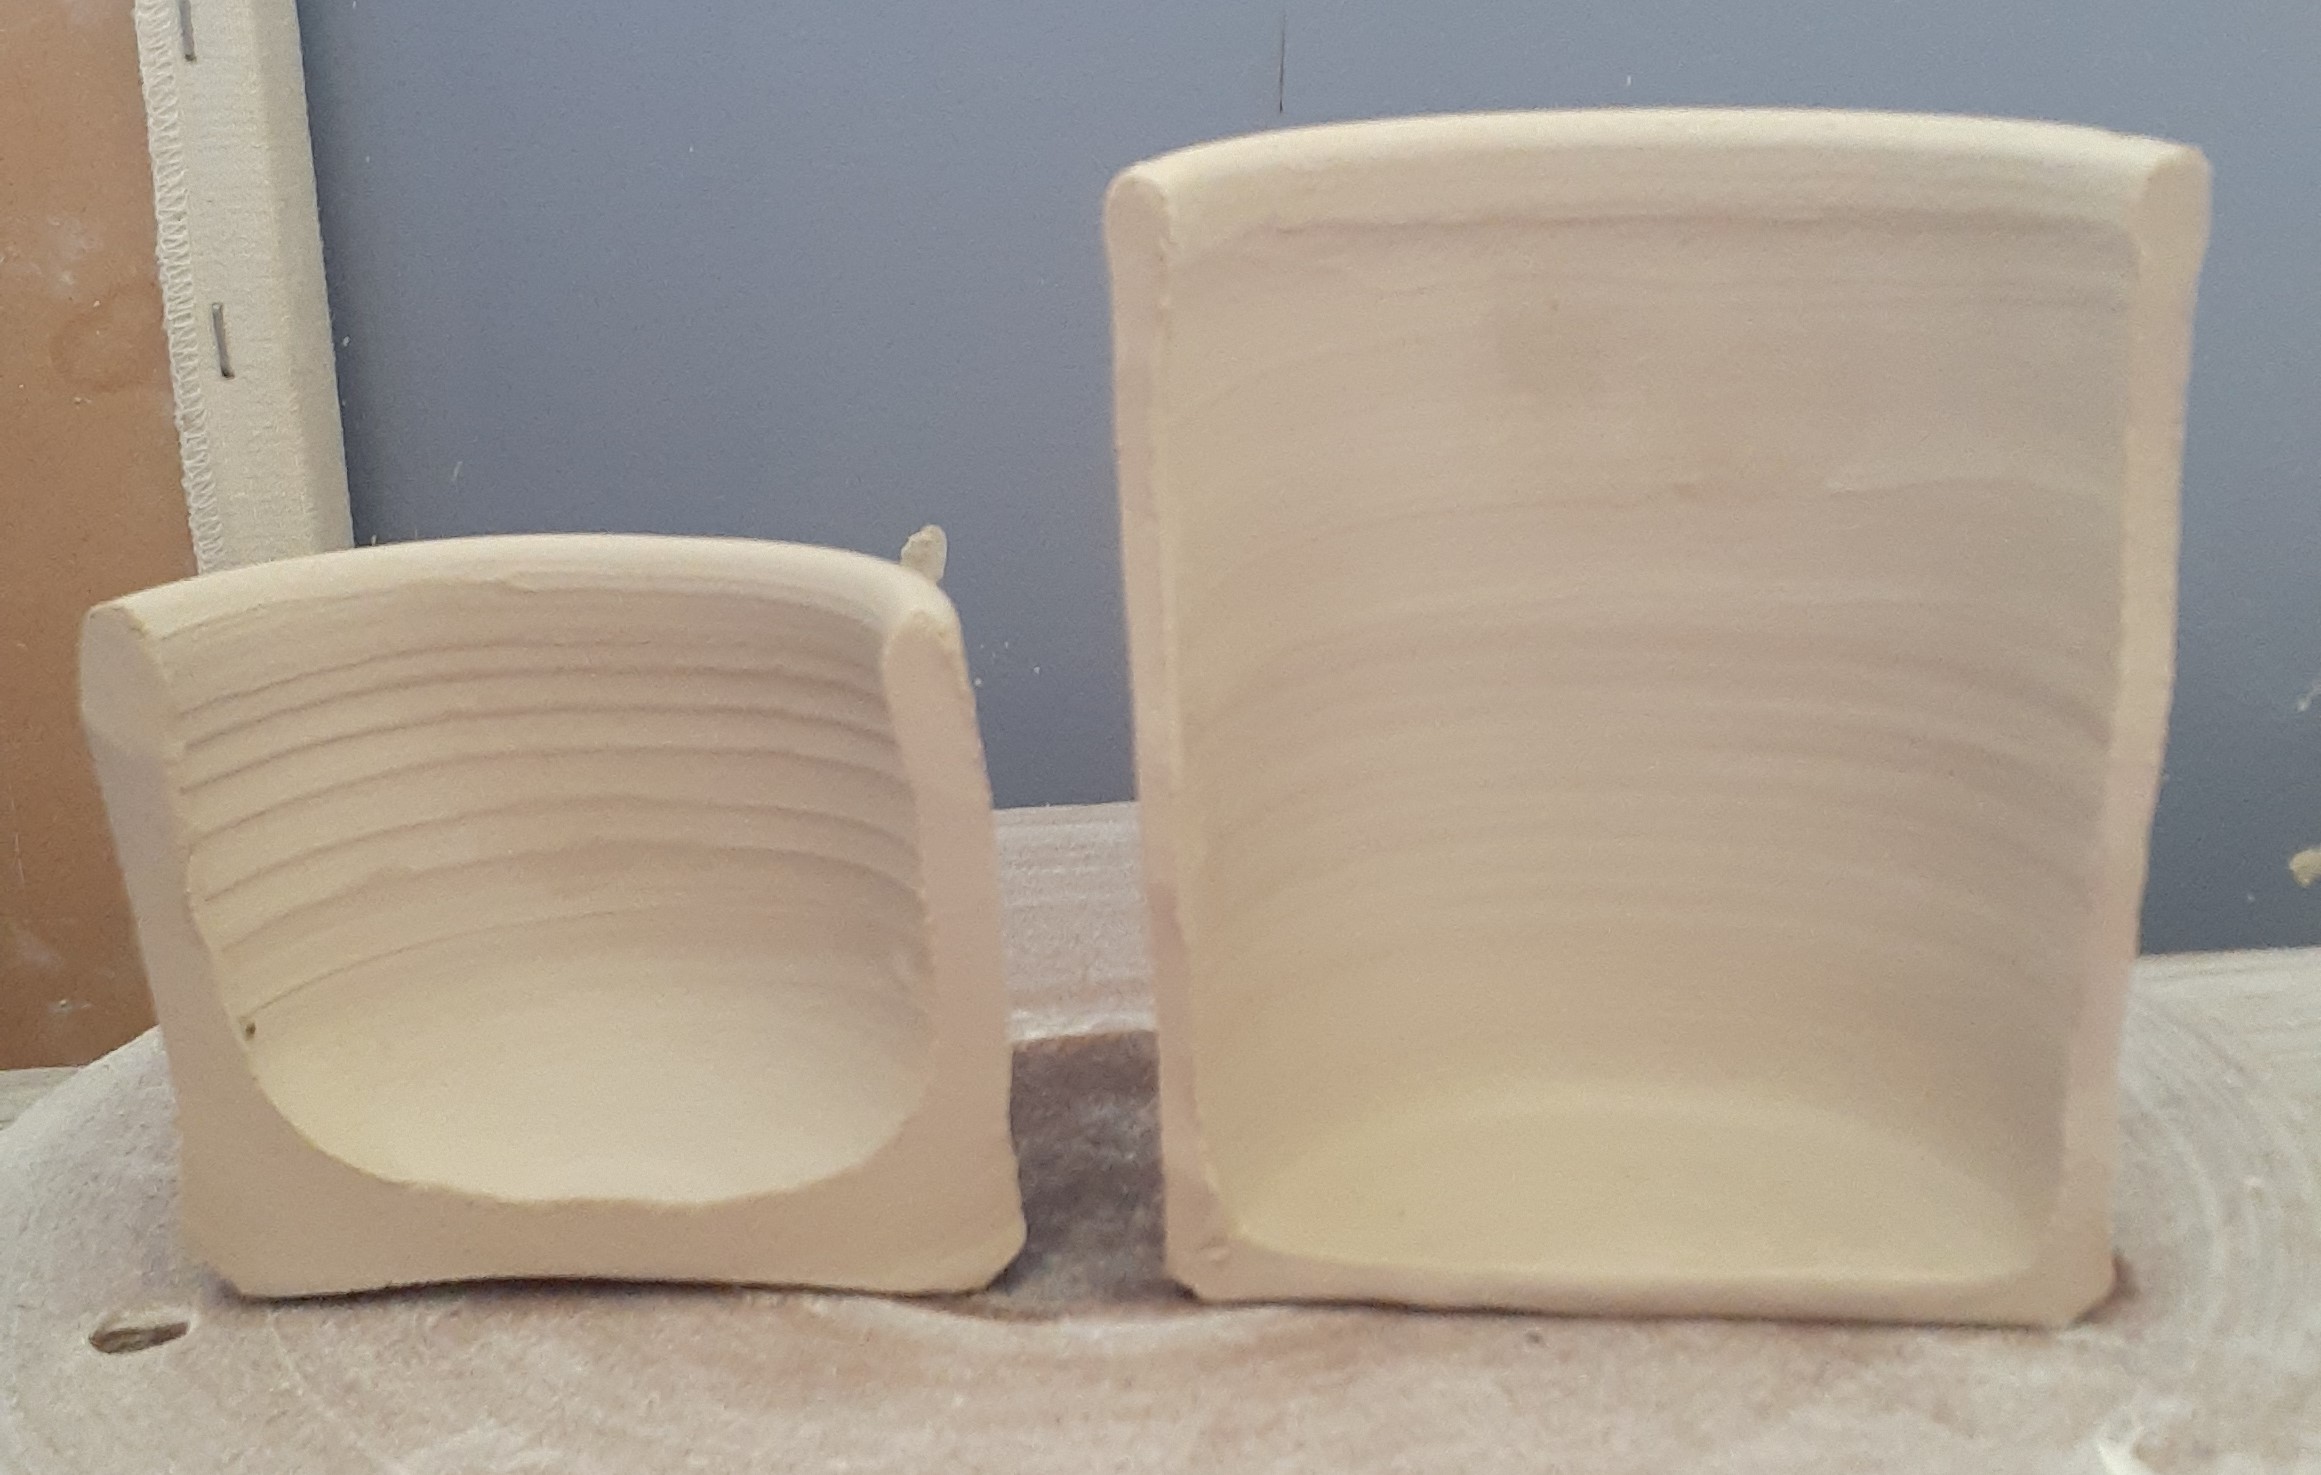 The images show two pots cut in half. Th image on the left is shorter and has much thicker walls than the one on the right